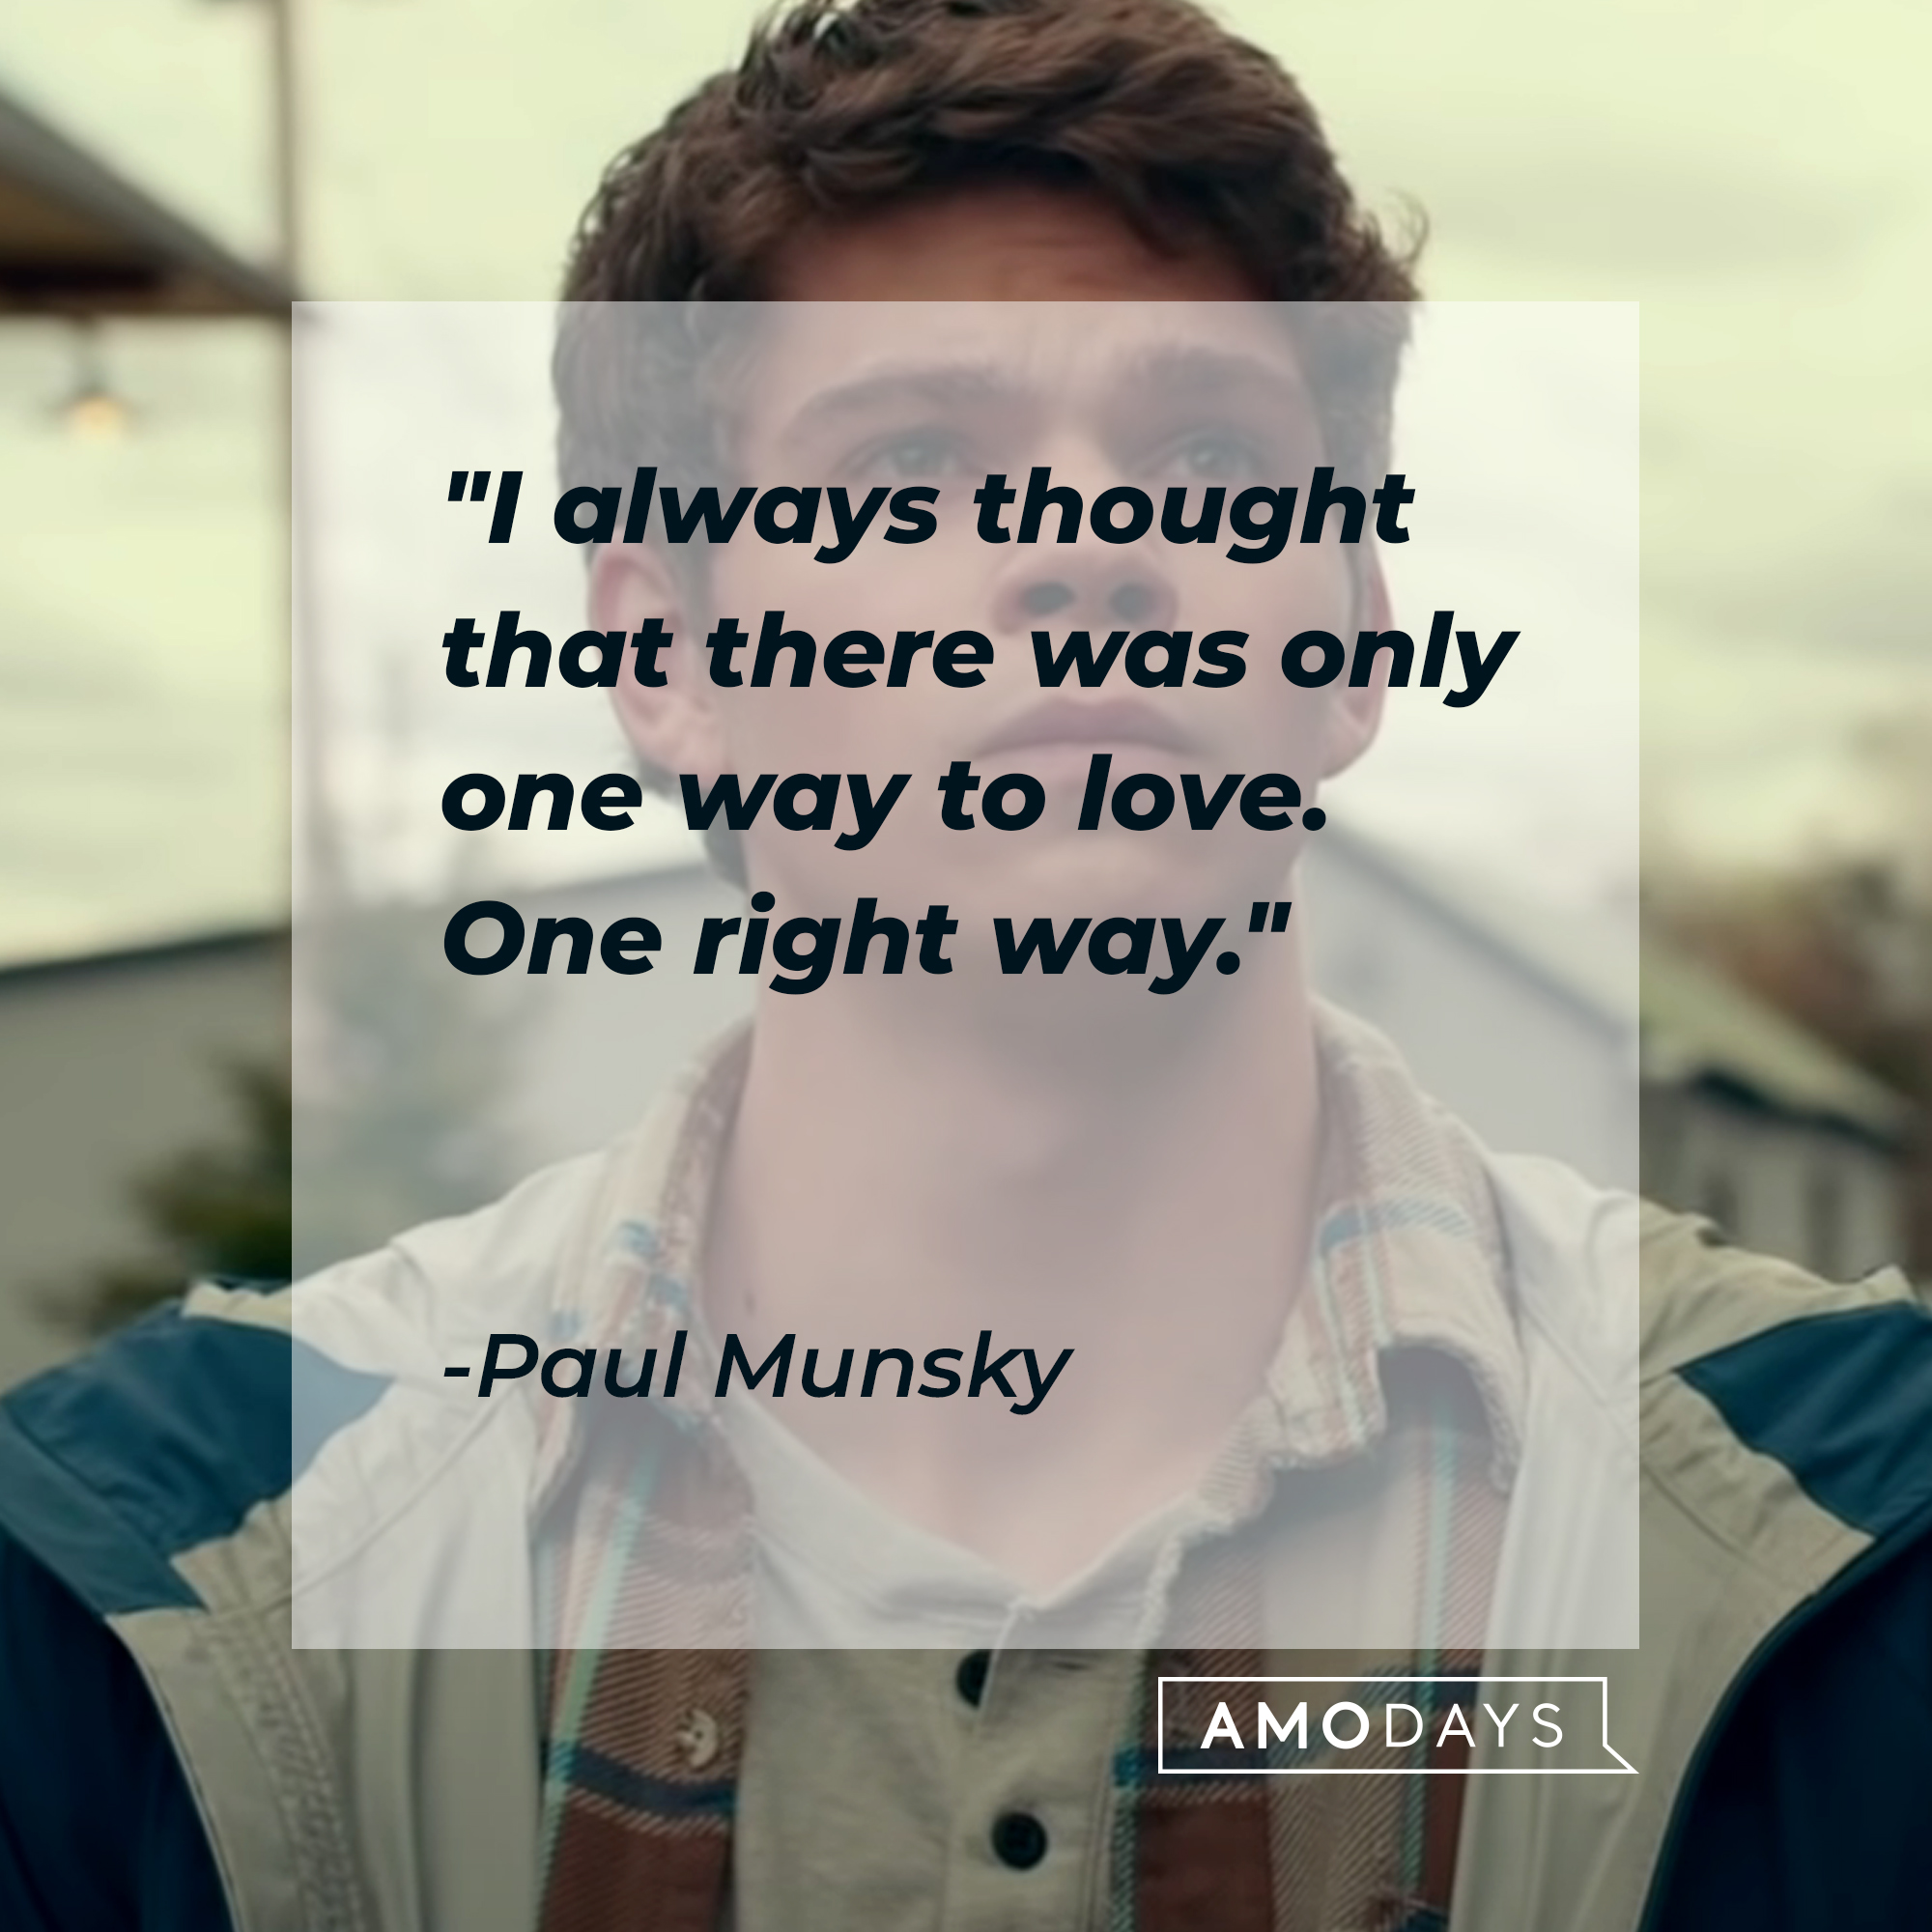 Paul Munsky's quote, "I always thought that there was only one way to love. One right way." | Image: youtube.com/Netflix